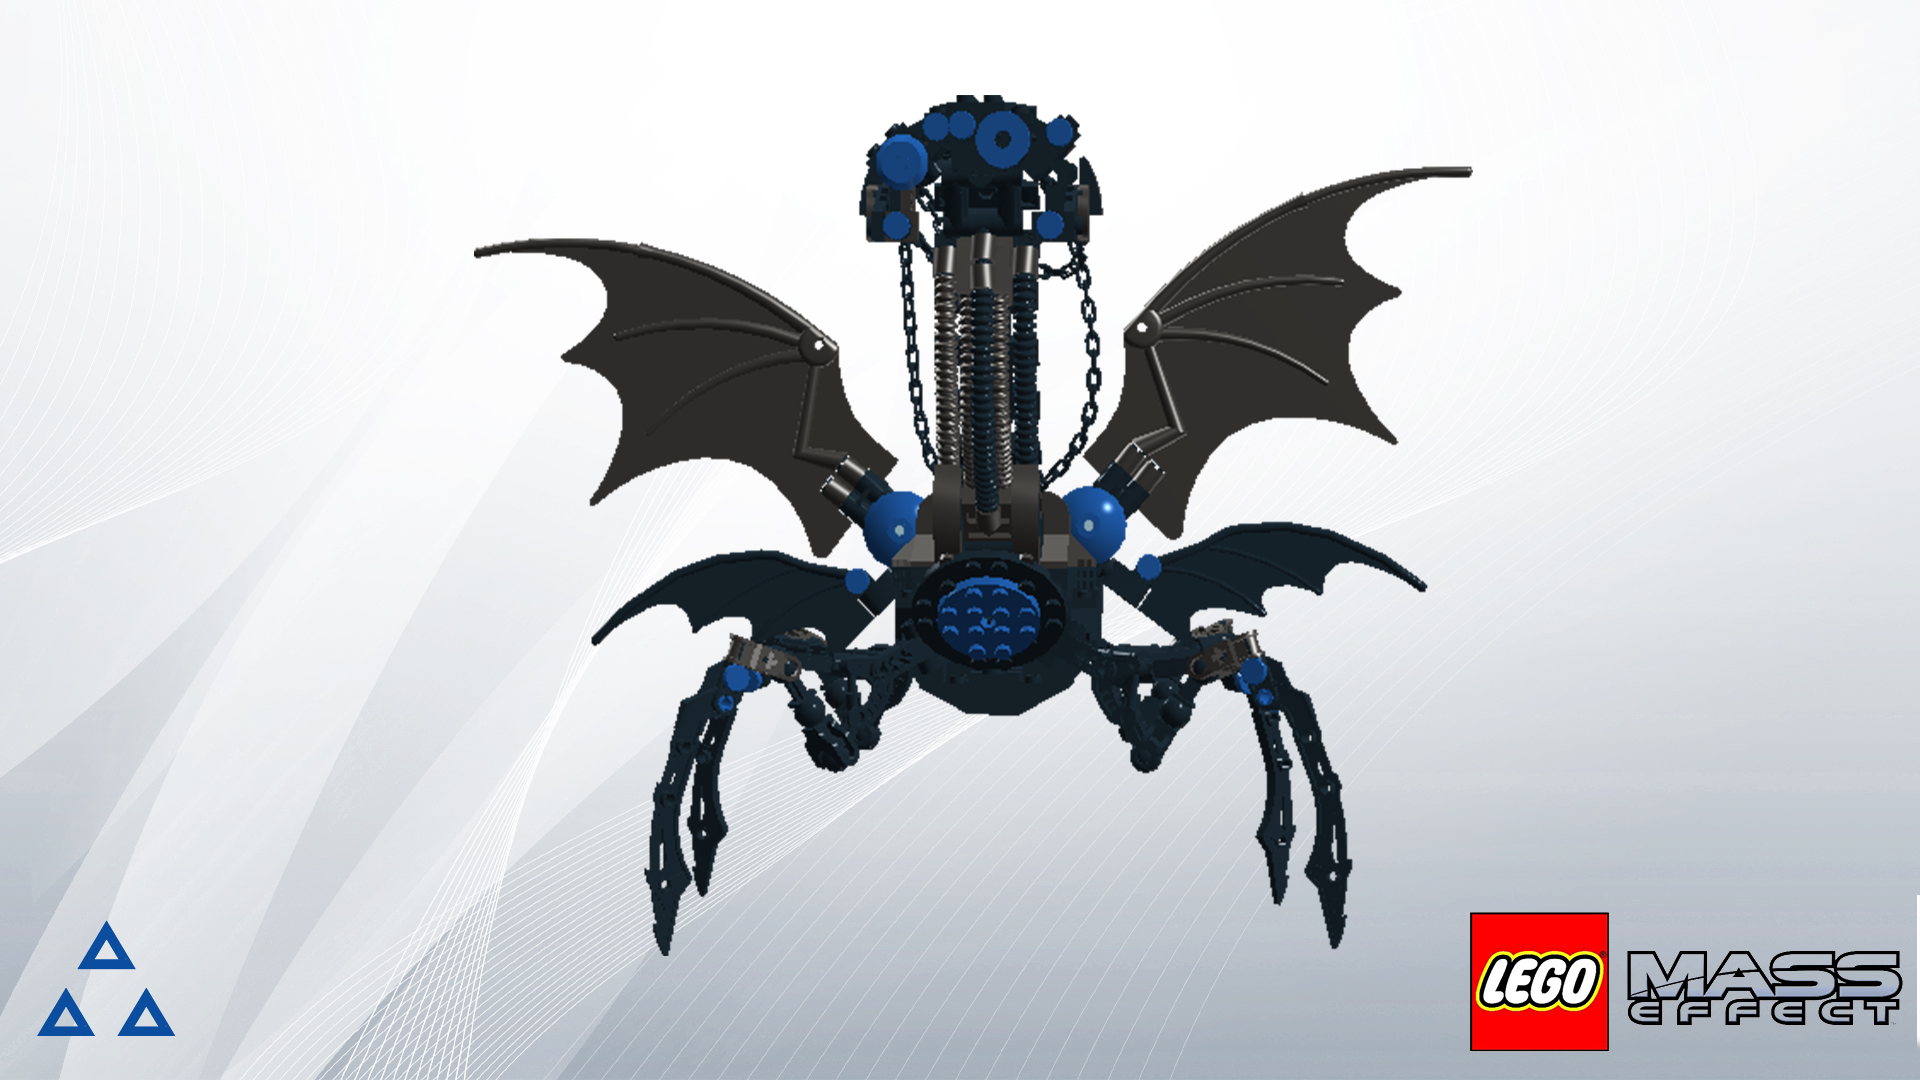 Lego Mass Effect Harvester - Longpost, Toys, Constructor, Monster, Games, Reapers, Mass effect, Lego, My